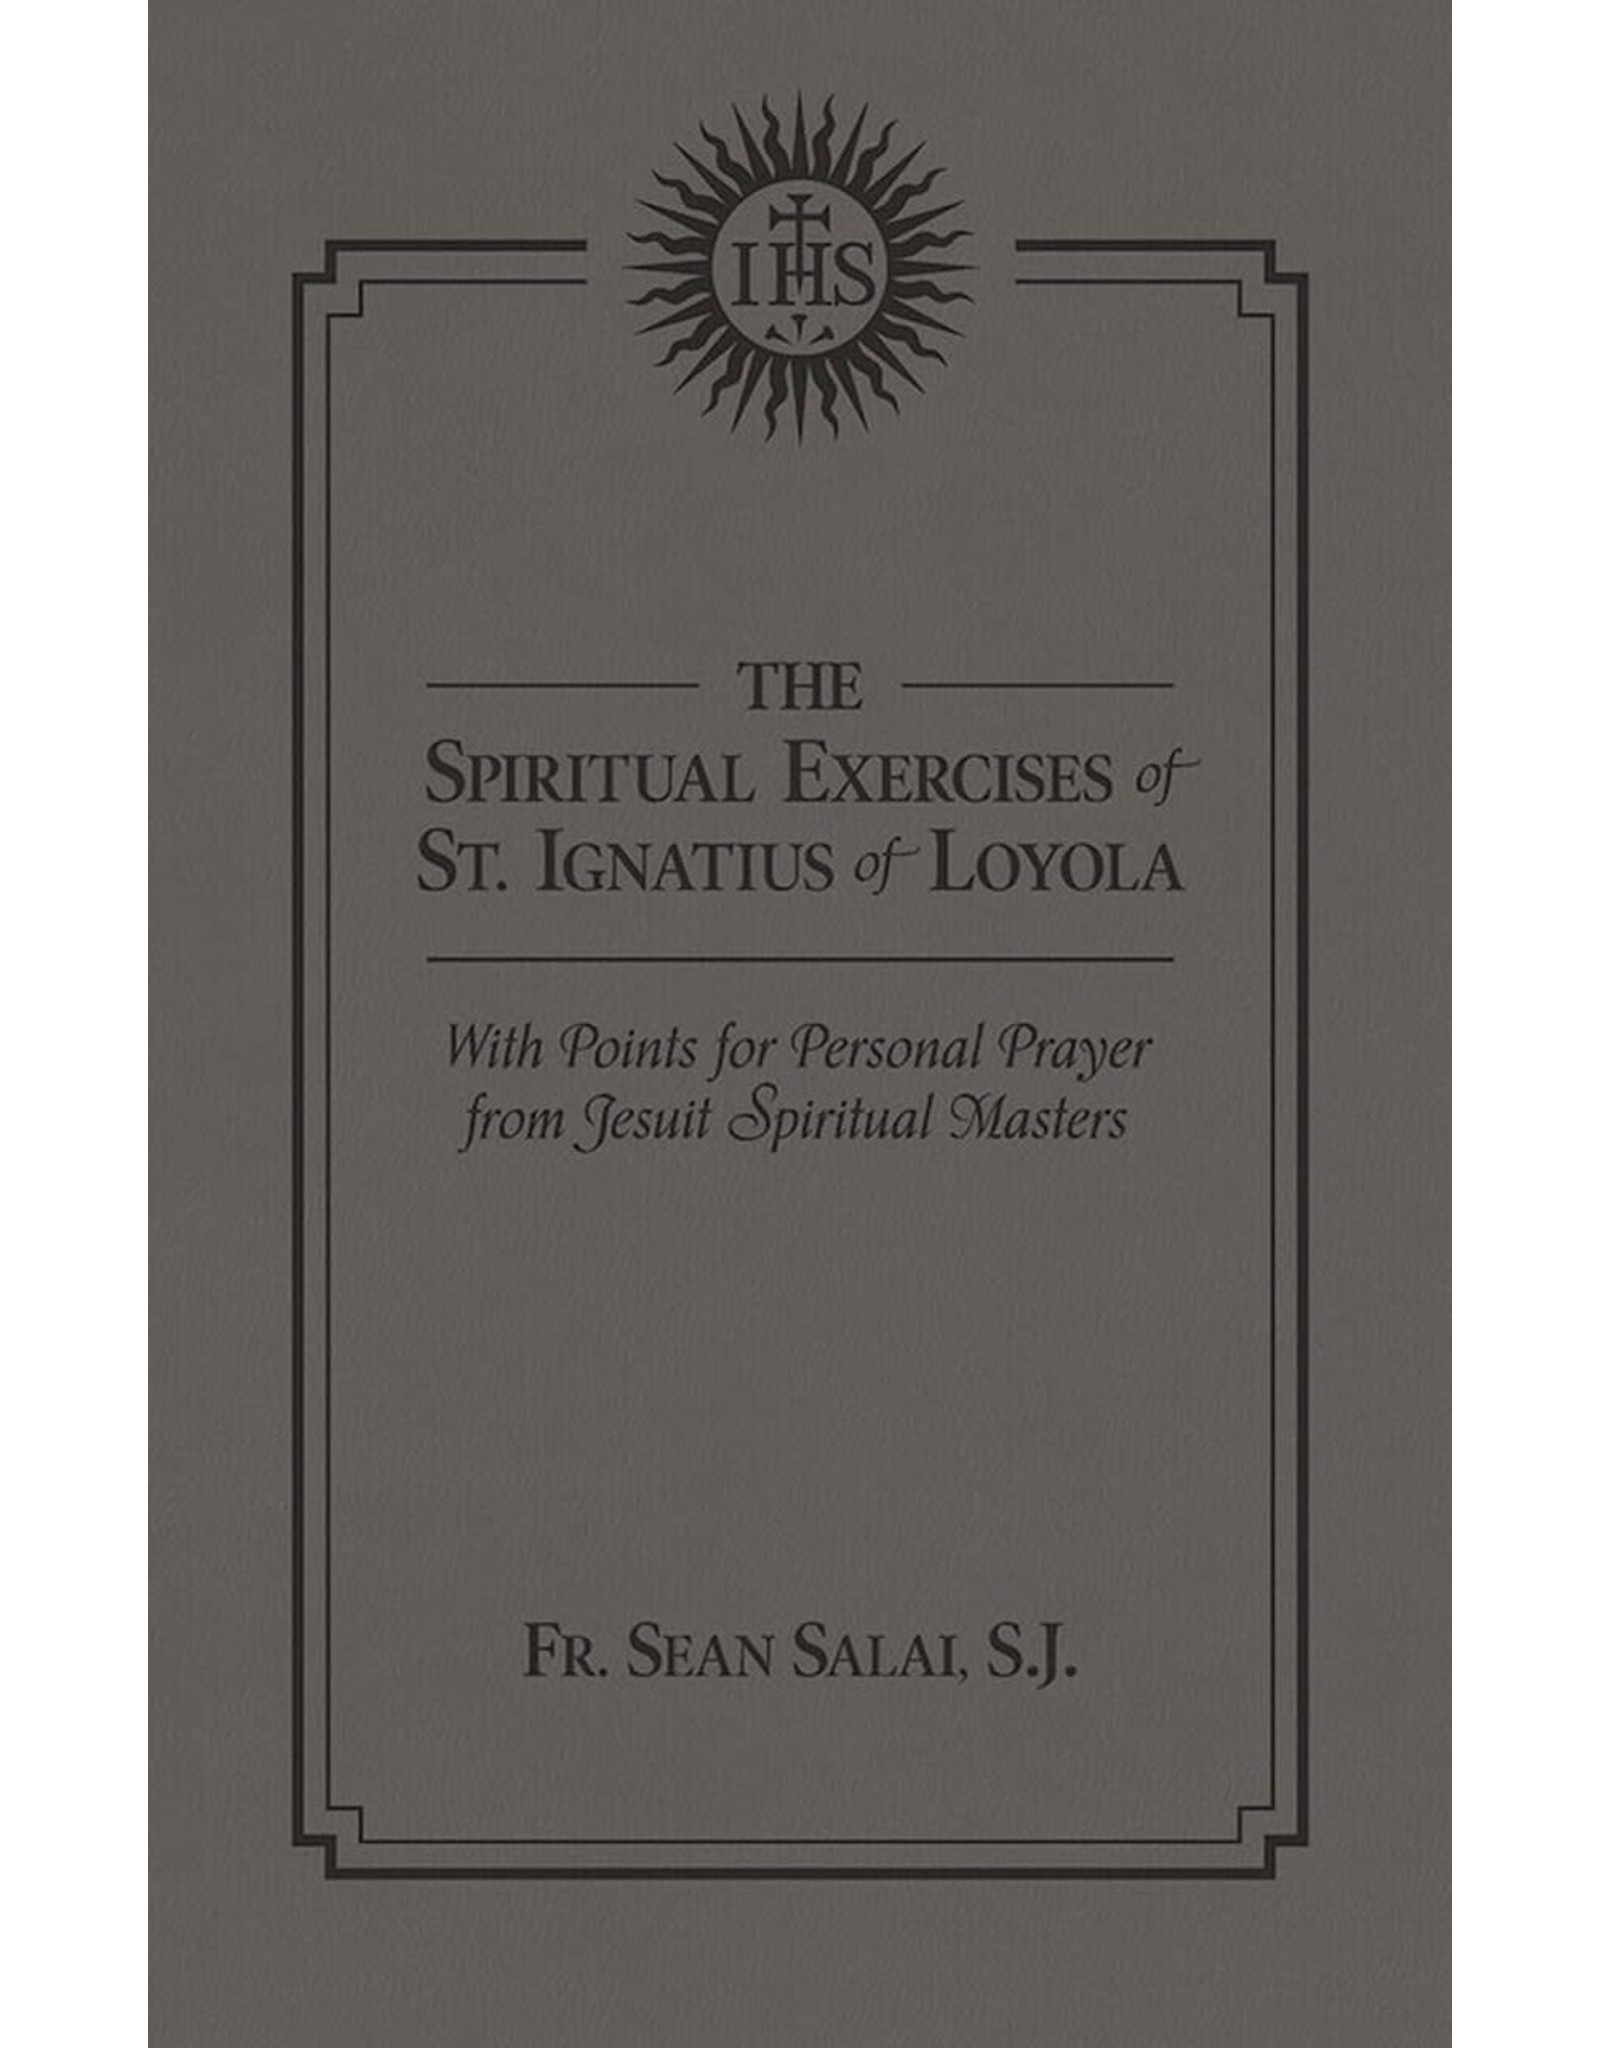 Tan Books The Spiritual Exercises Of Saint Ignatius With Points For Prayer From Jesuit Spiritual Masters by Rev. Fr. Sean Salai, SJ (Leatherette)